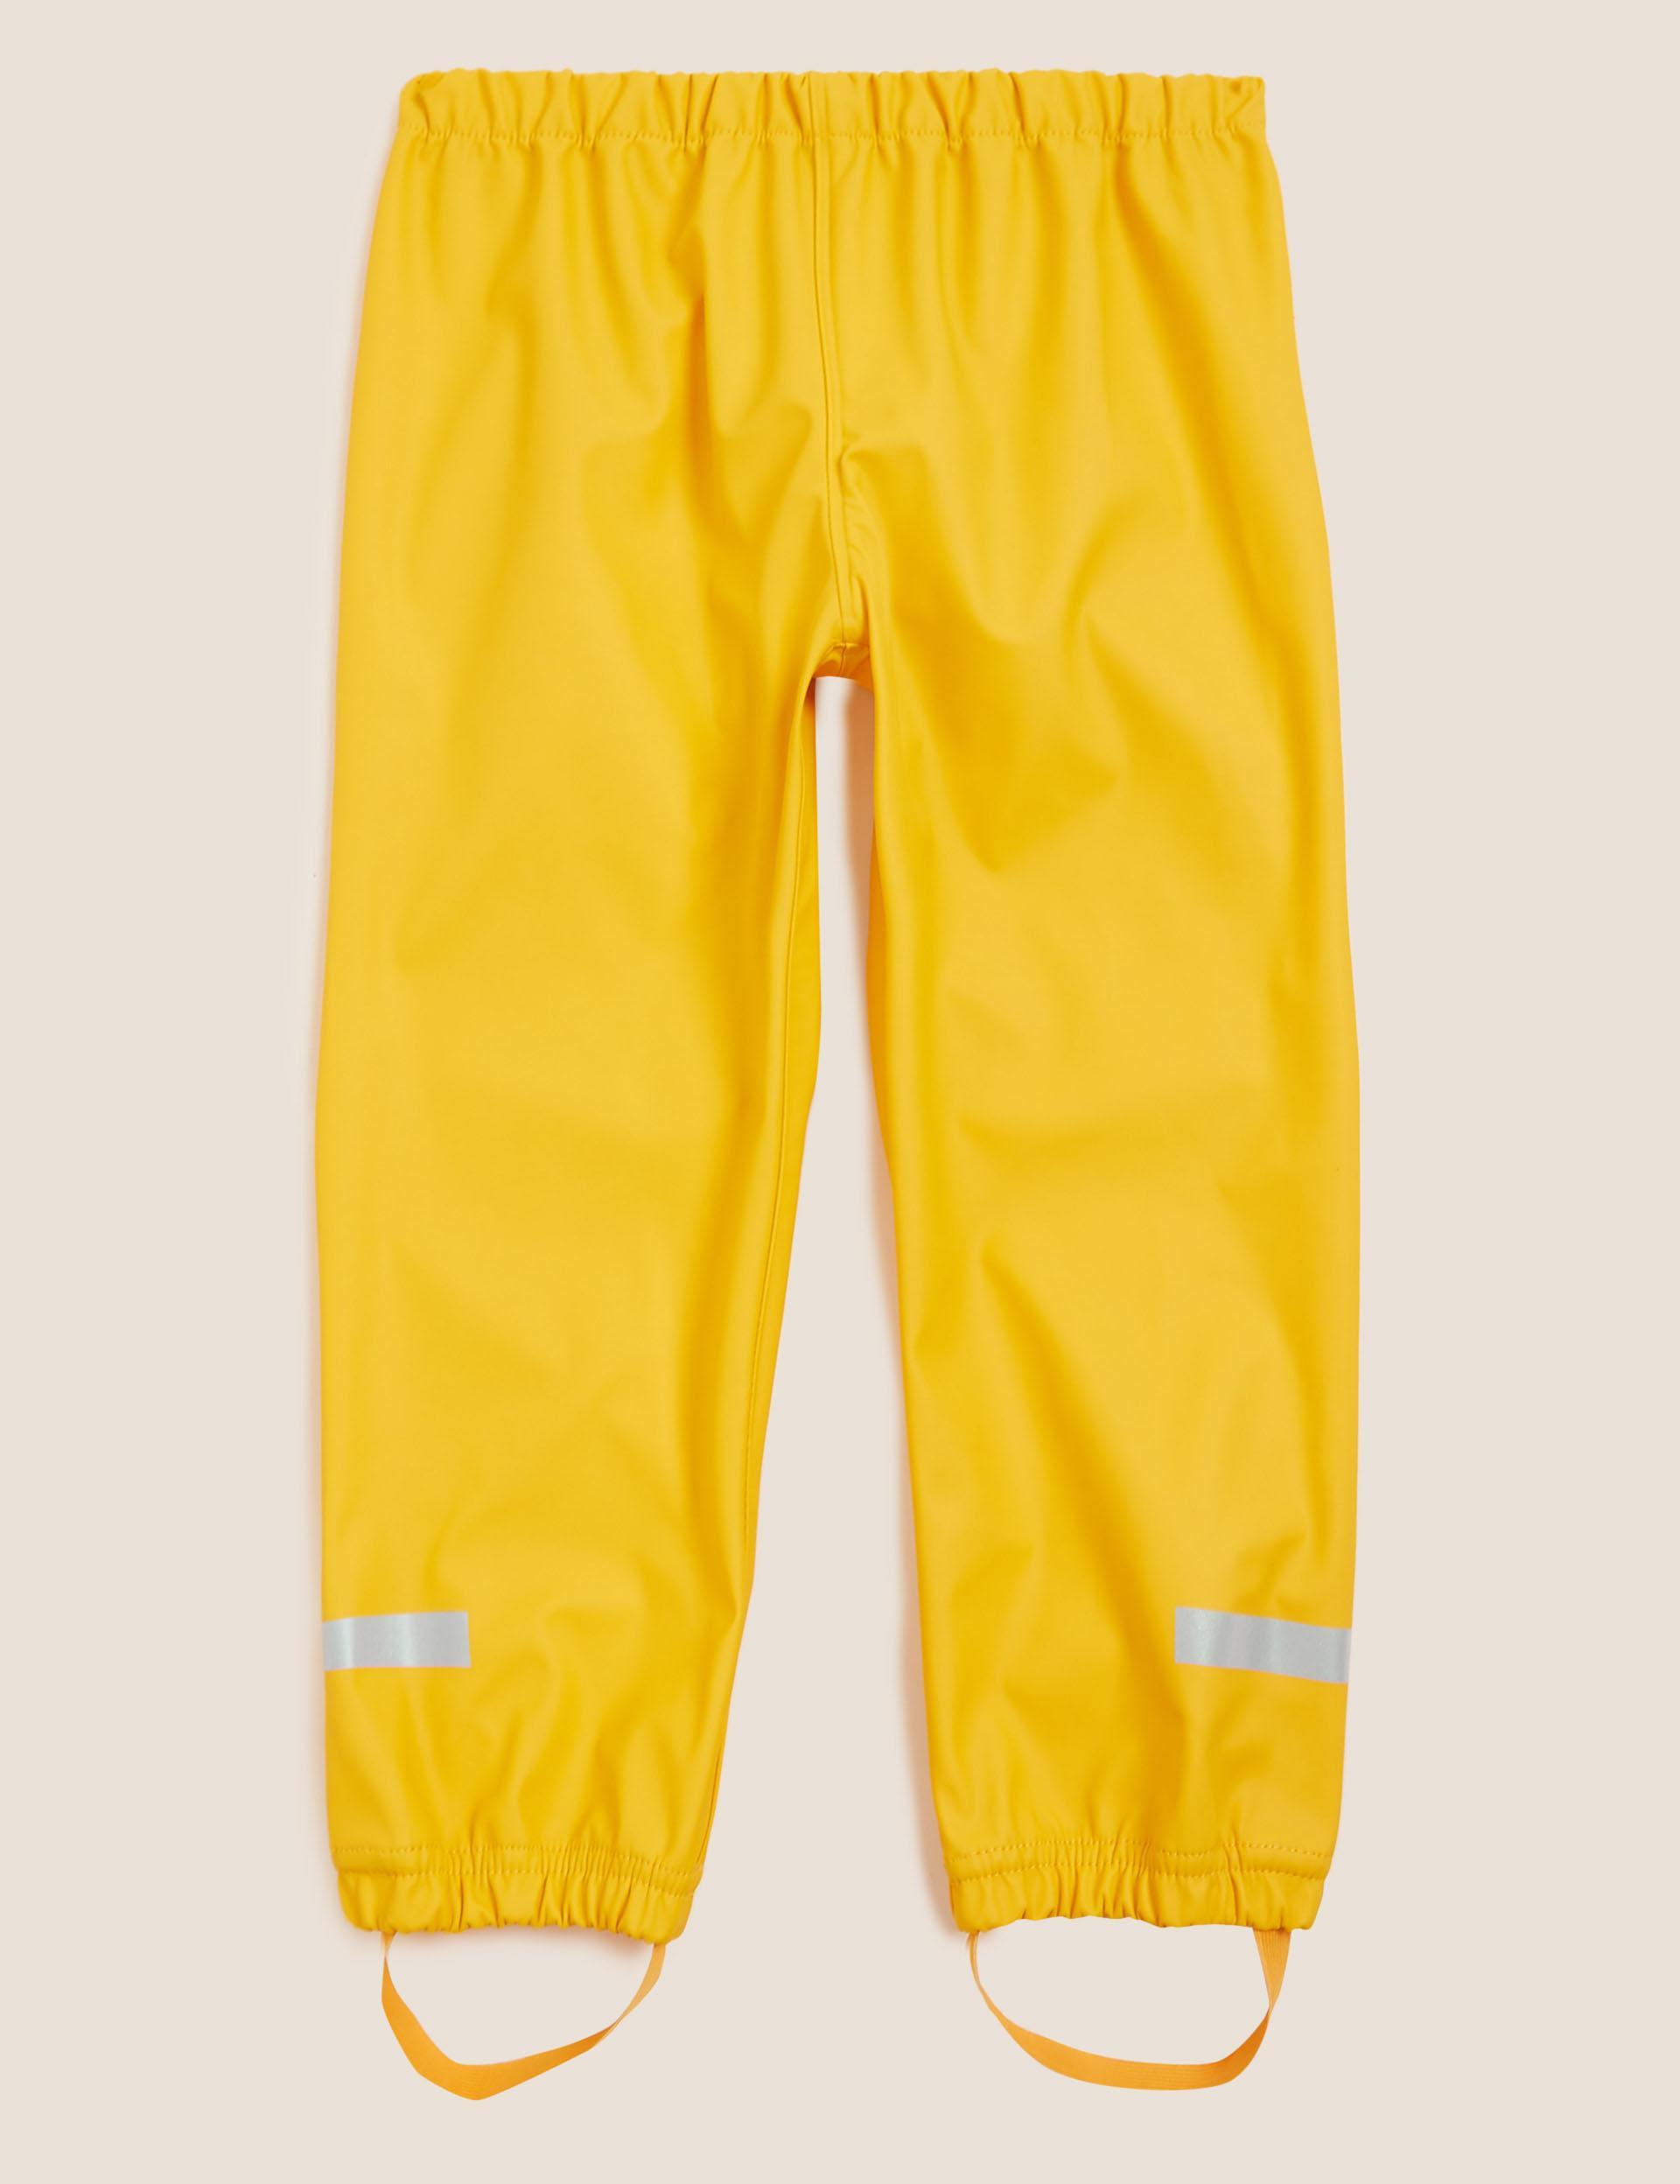 Kids puddle trousersm in yellow, £18, M&S: marksandspencer.com